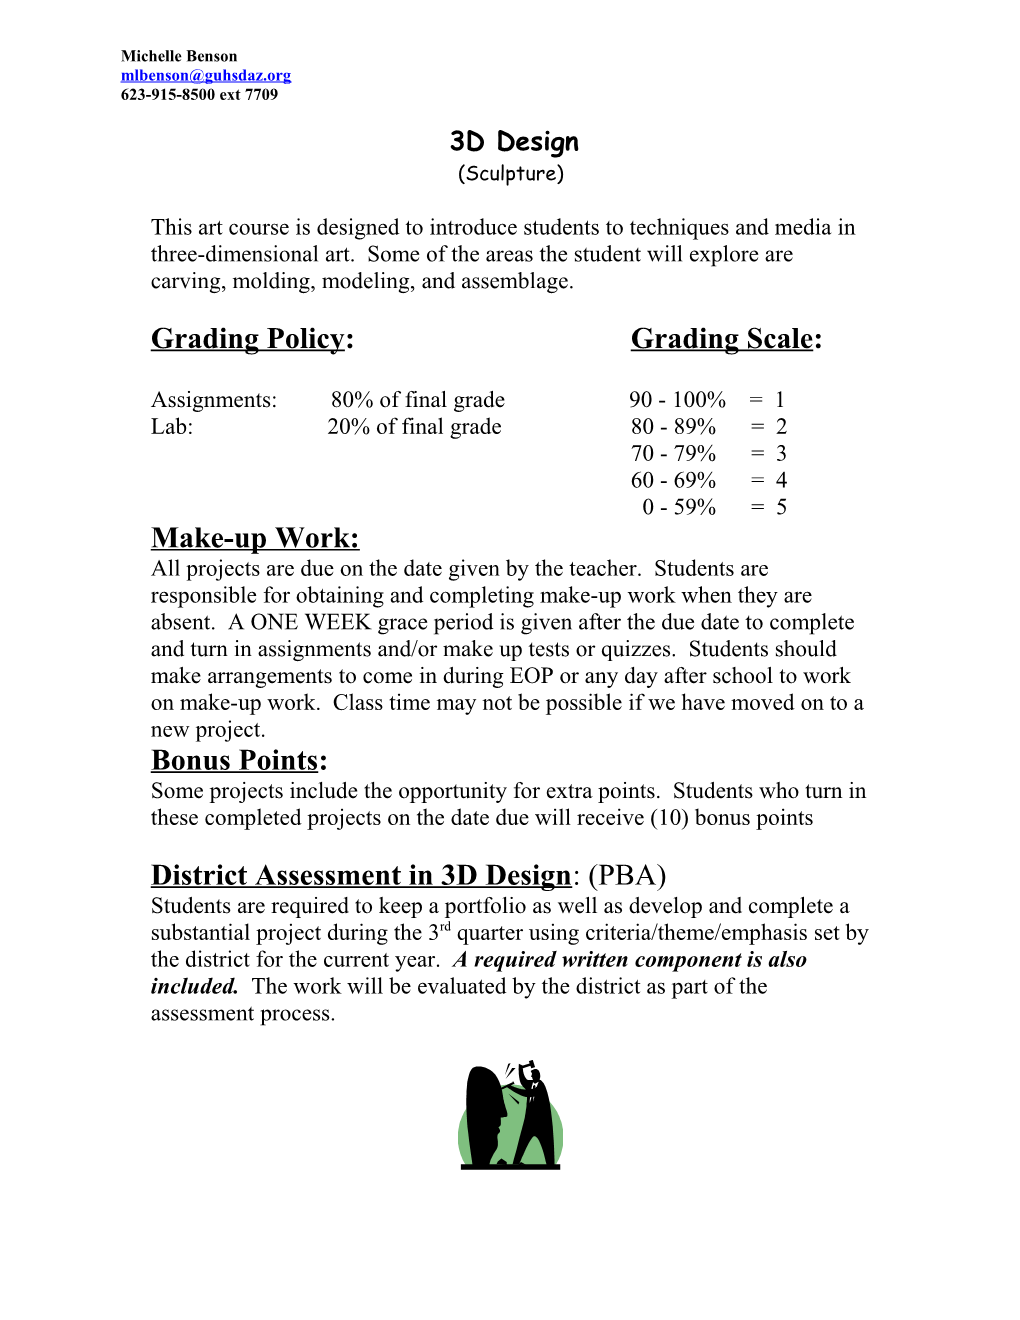 Grading Policy: Grading Scale